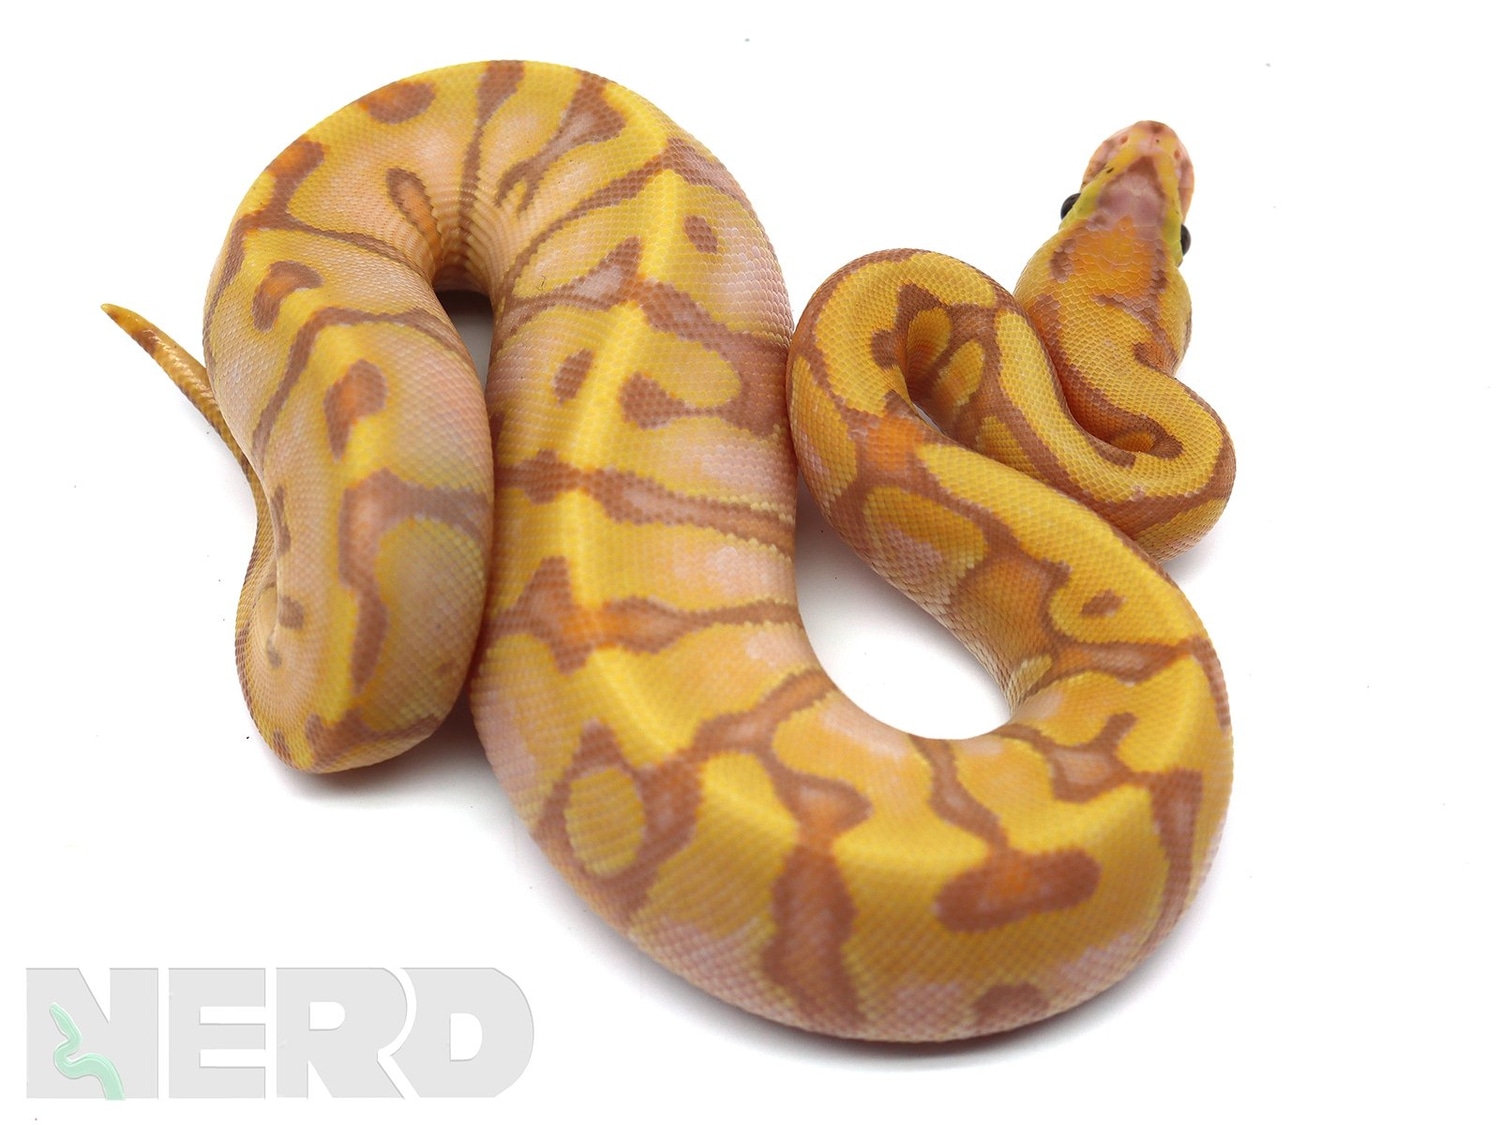 Coral Glow Hidden Gene Woma Granite Enchi Fader Odium Possible Het. Piebald Ball Python by New England Reptile Distributors